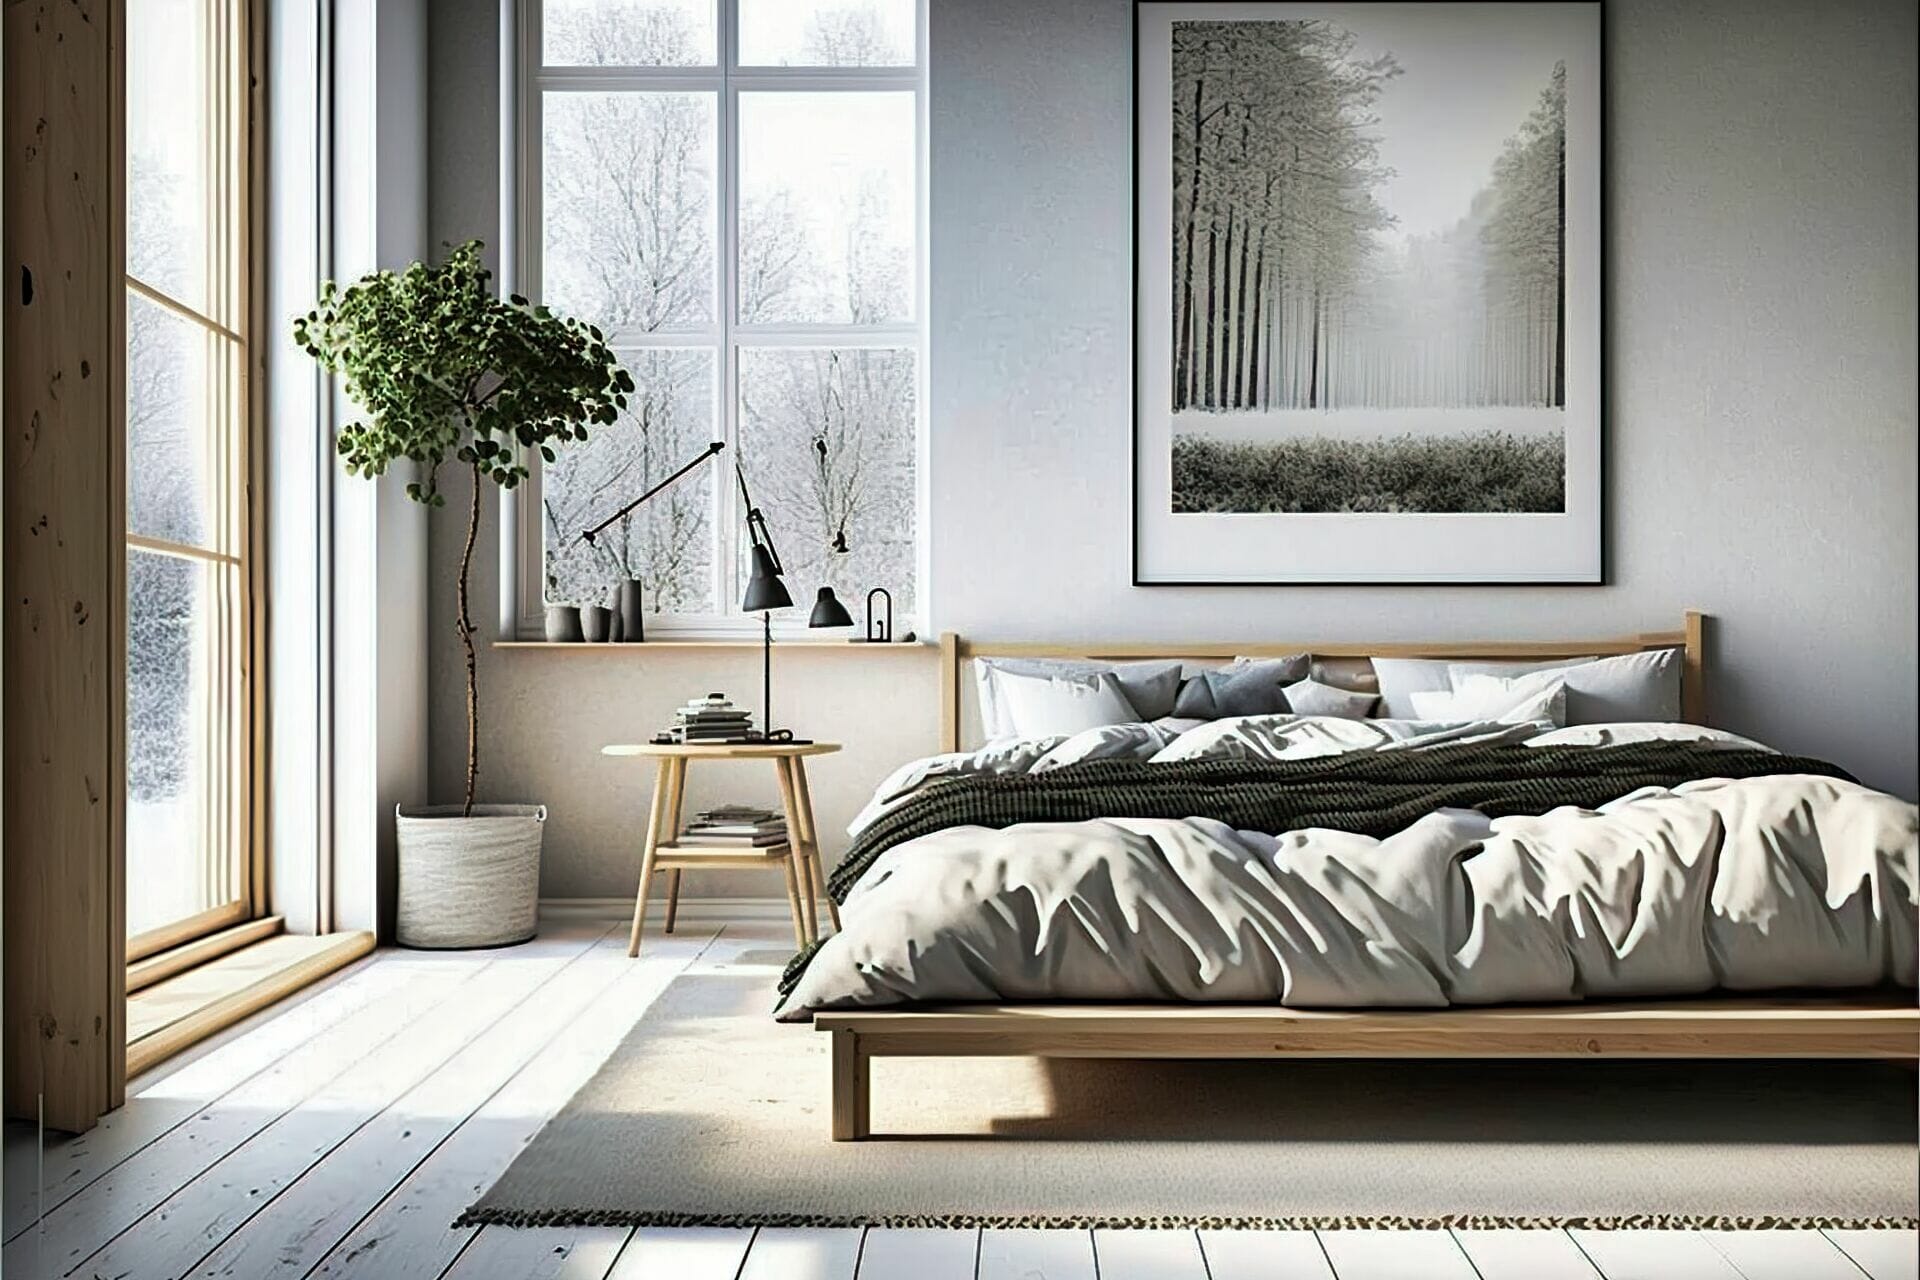 Scandinavian Bedroom – This Airy Room Features Light Wood Bed Frame And Nightstand, Light Wood Flooring, White Walls, And A Light Gray Rug. A Few Naturalistic Accents Give The Room A Light And Airy Feel.